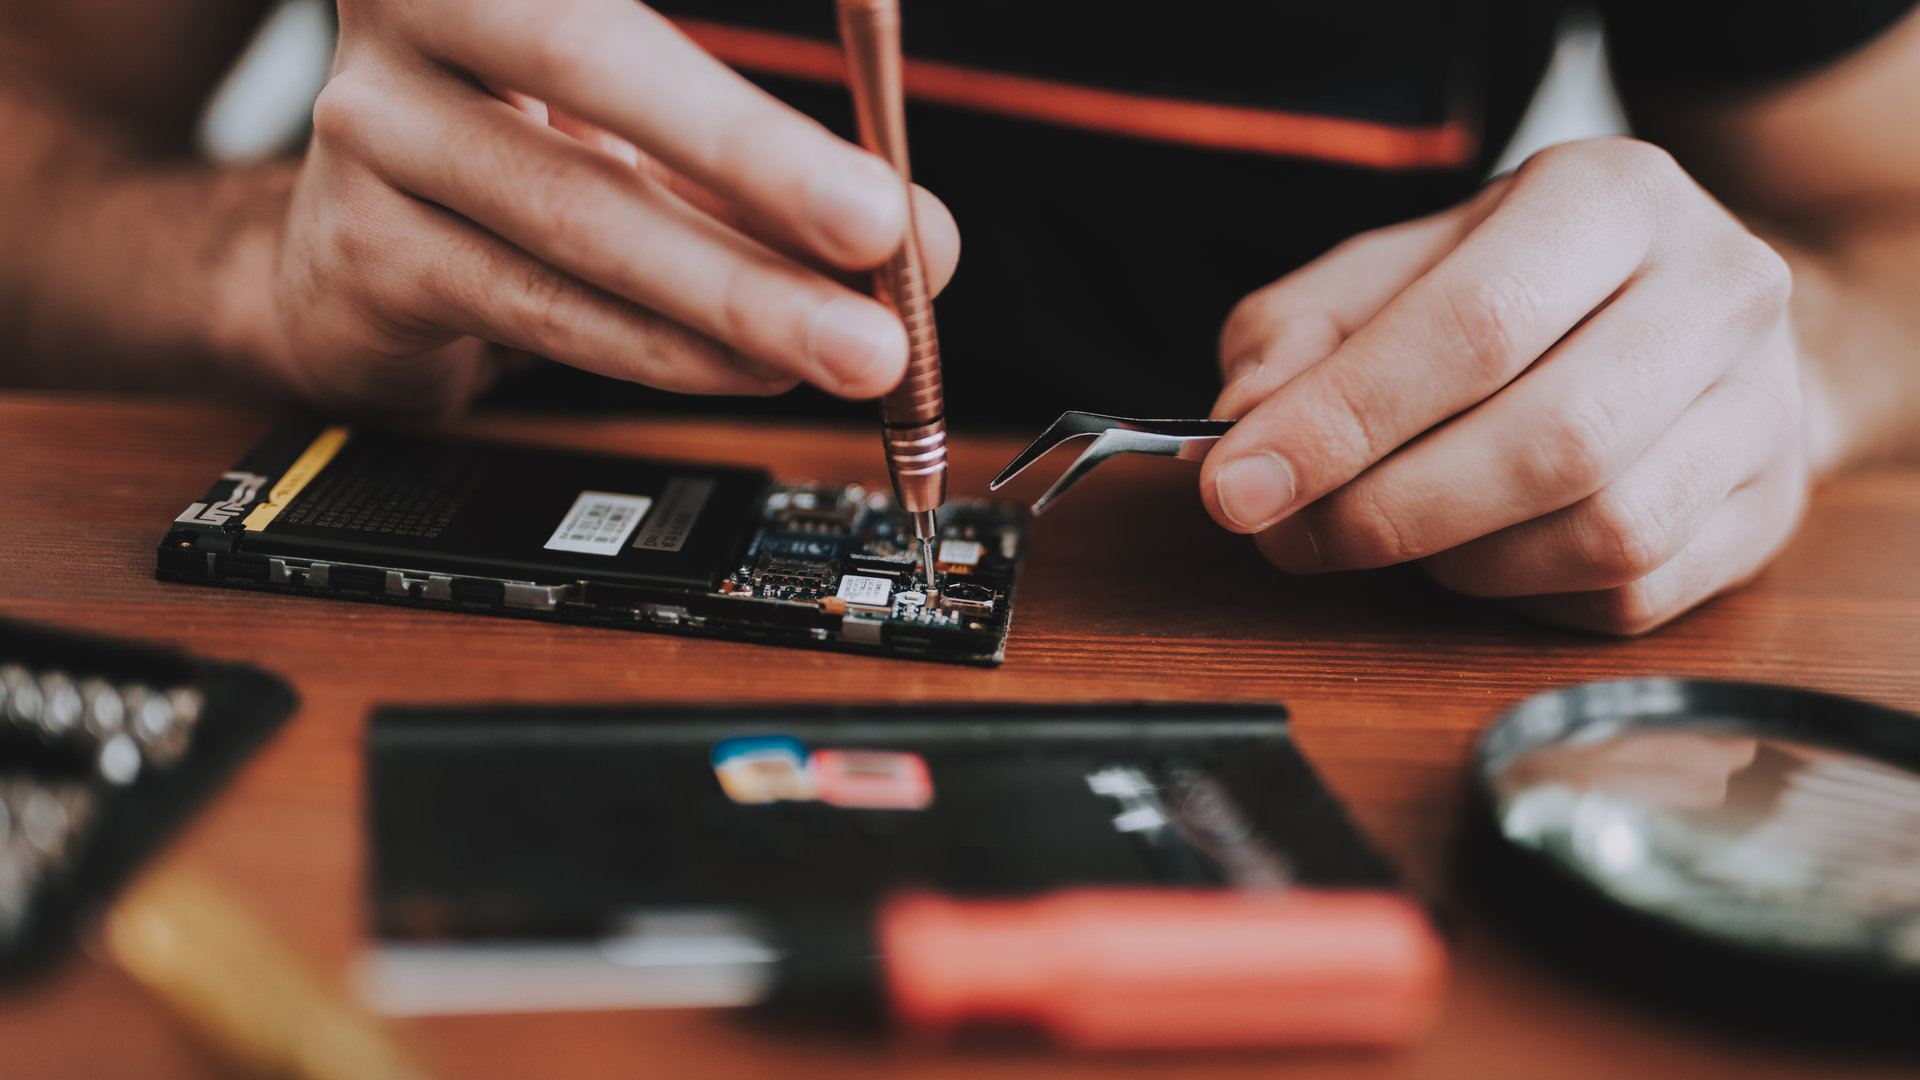 Close up. Young Man Repairing Mobile Phone. Repair Shop. Worker with Tools. Magnifying Glass. Digital Device. Tools on Desk. Electronic Devices Concept. Mobile Device. Smartphone Repair.